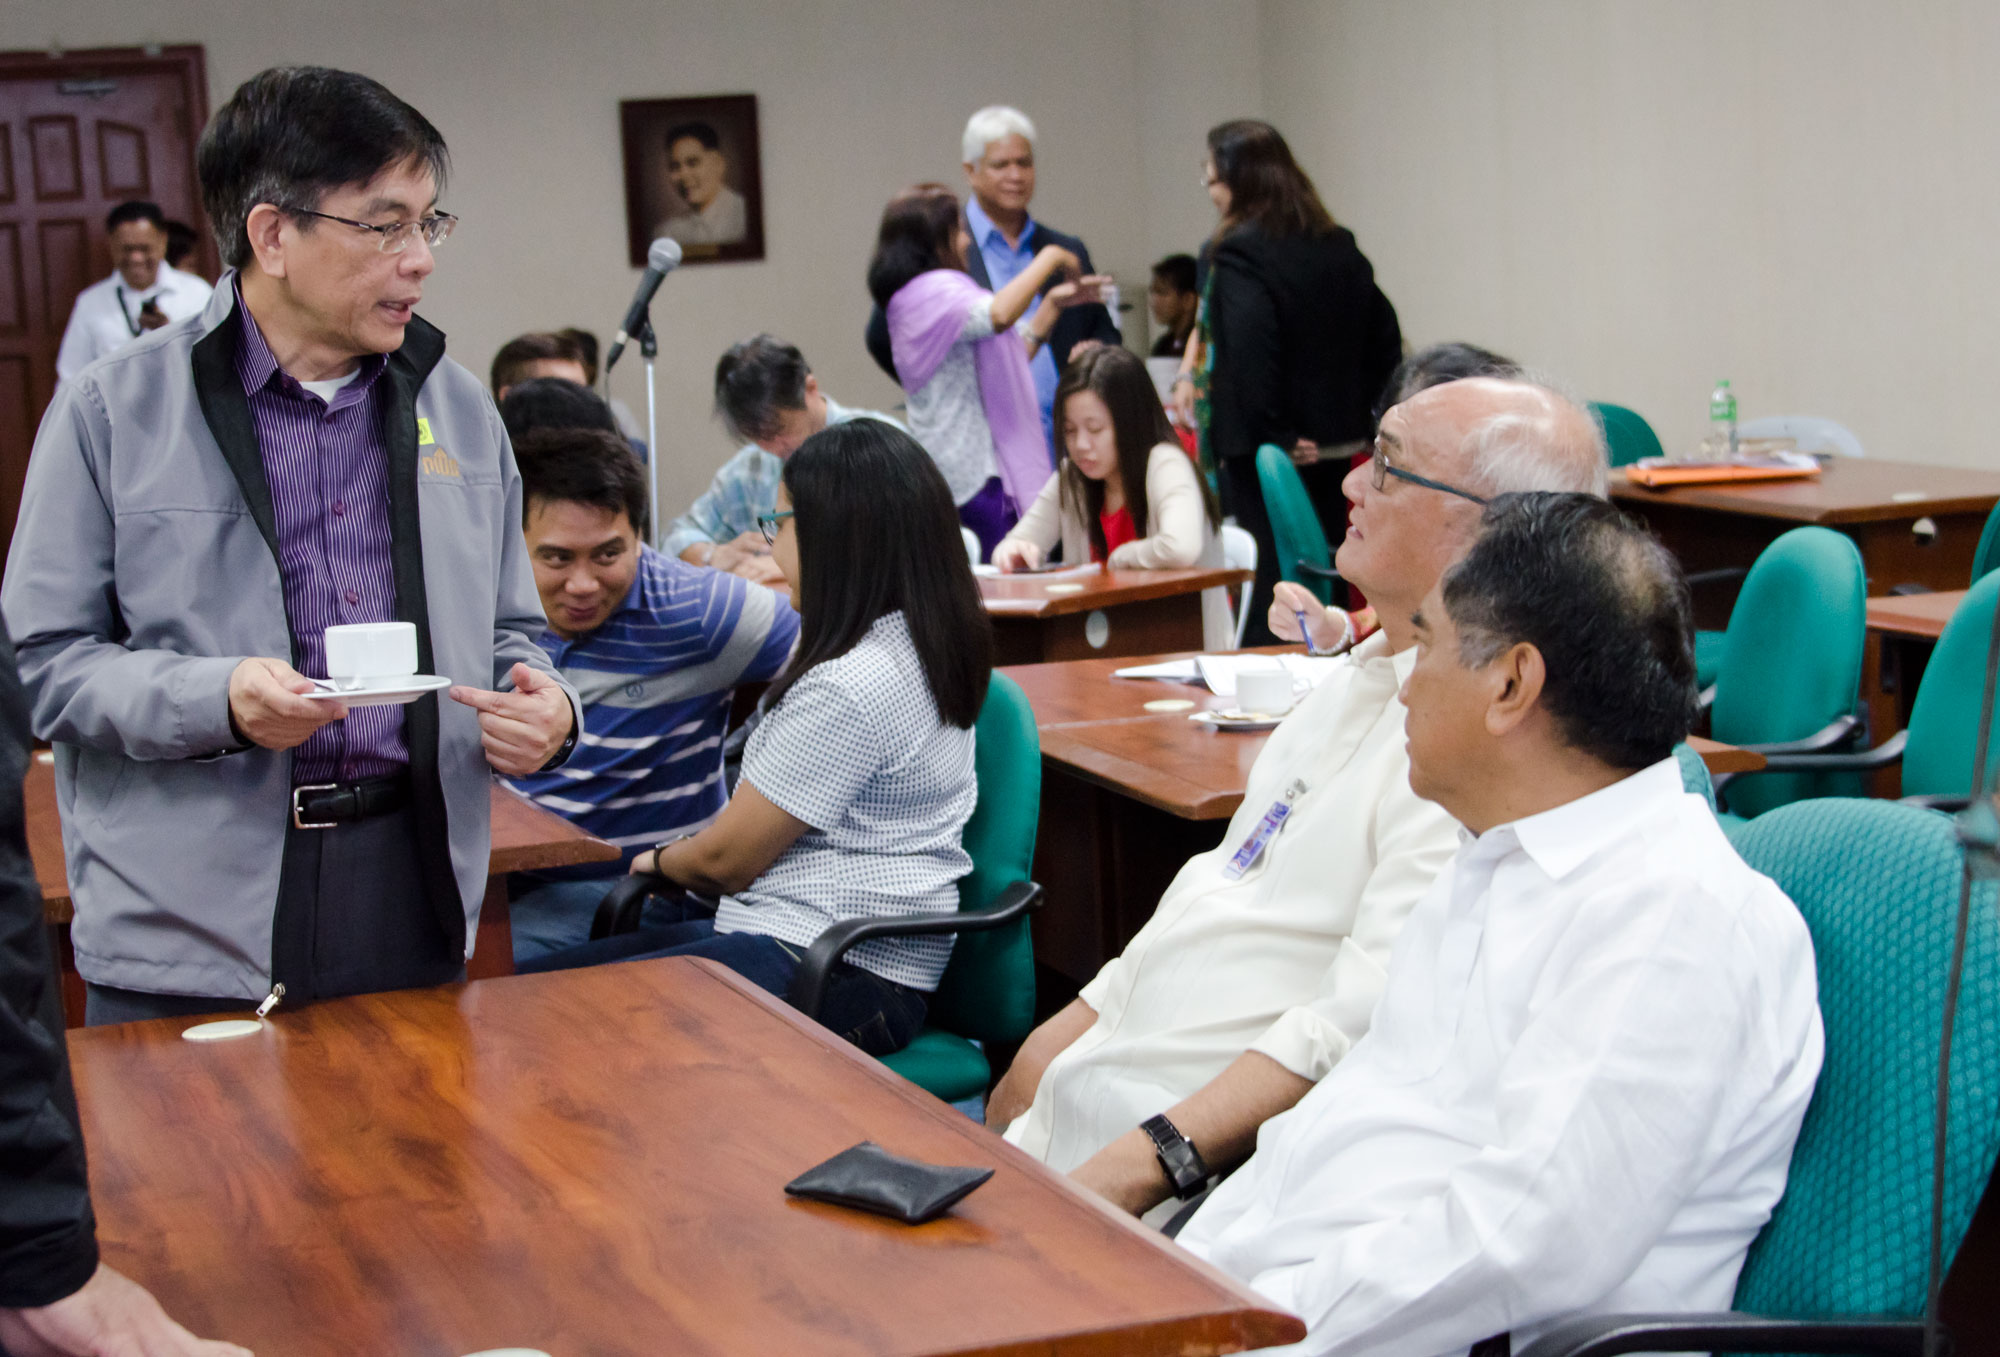 Senate Centennial Lecture Series Assessment Of The Bottom-Up Budgeting Process For FY 2015-GGM_7840.jpg